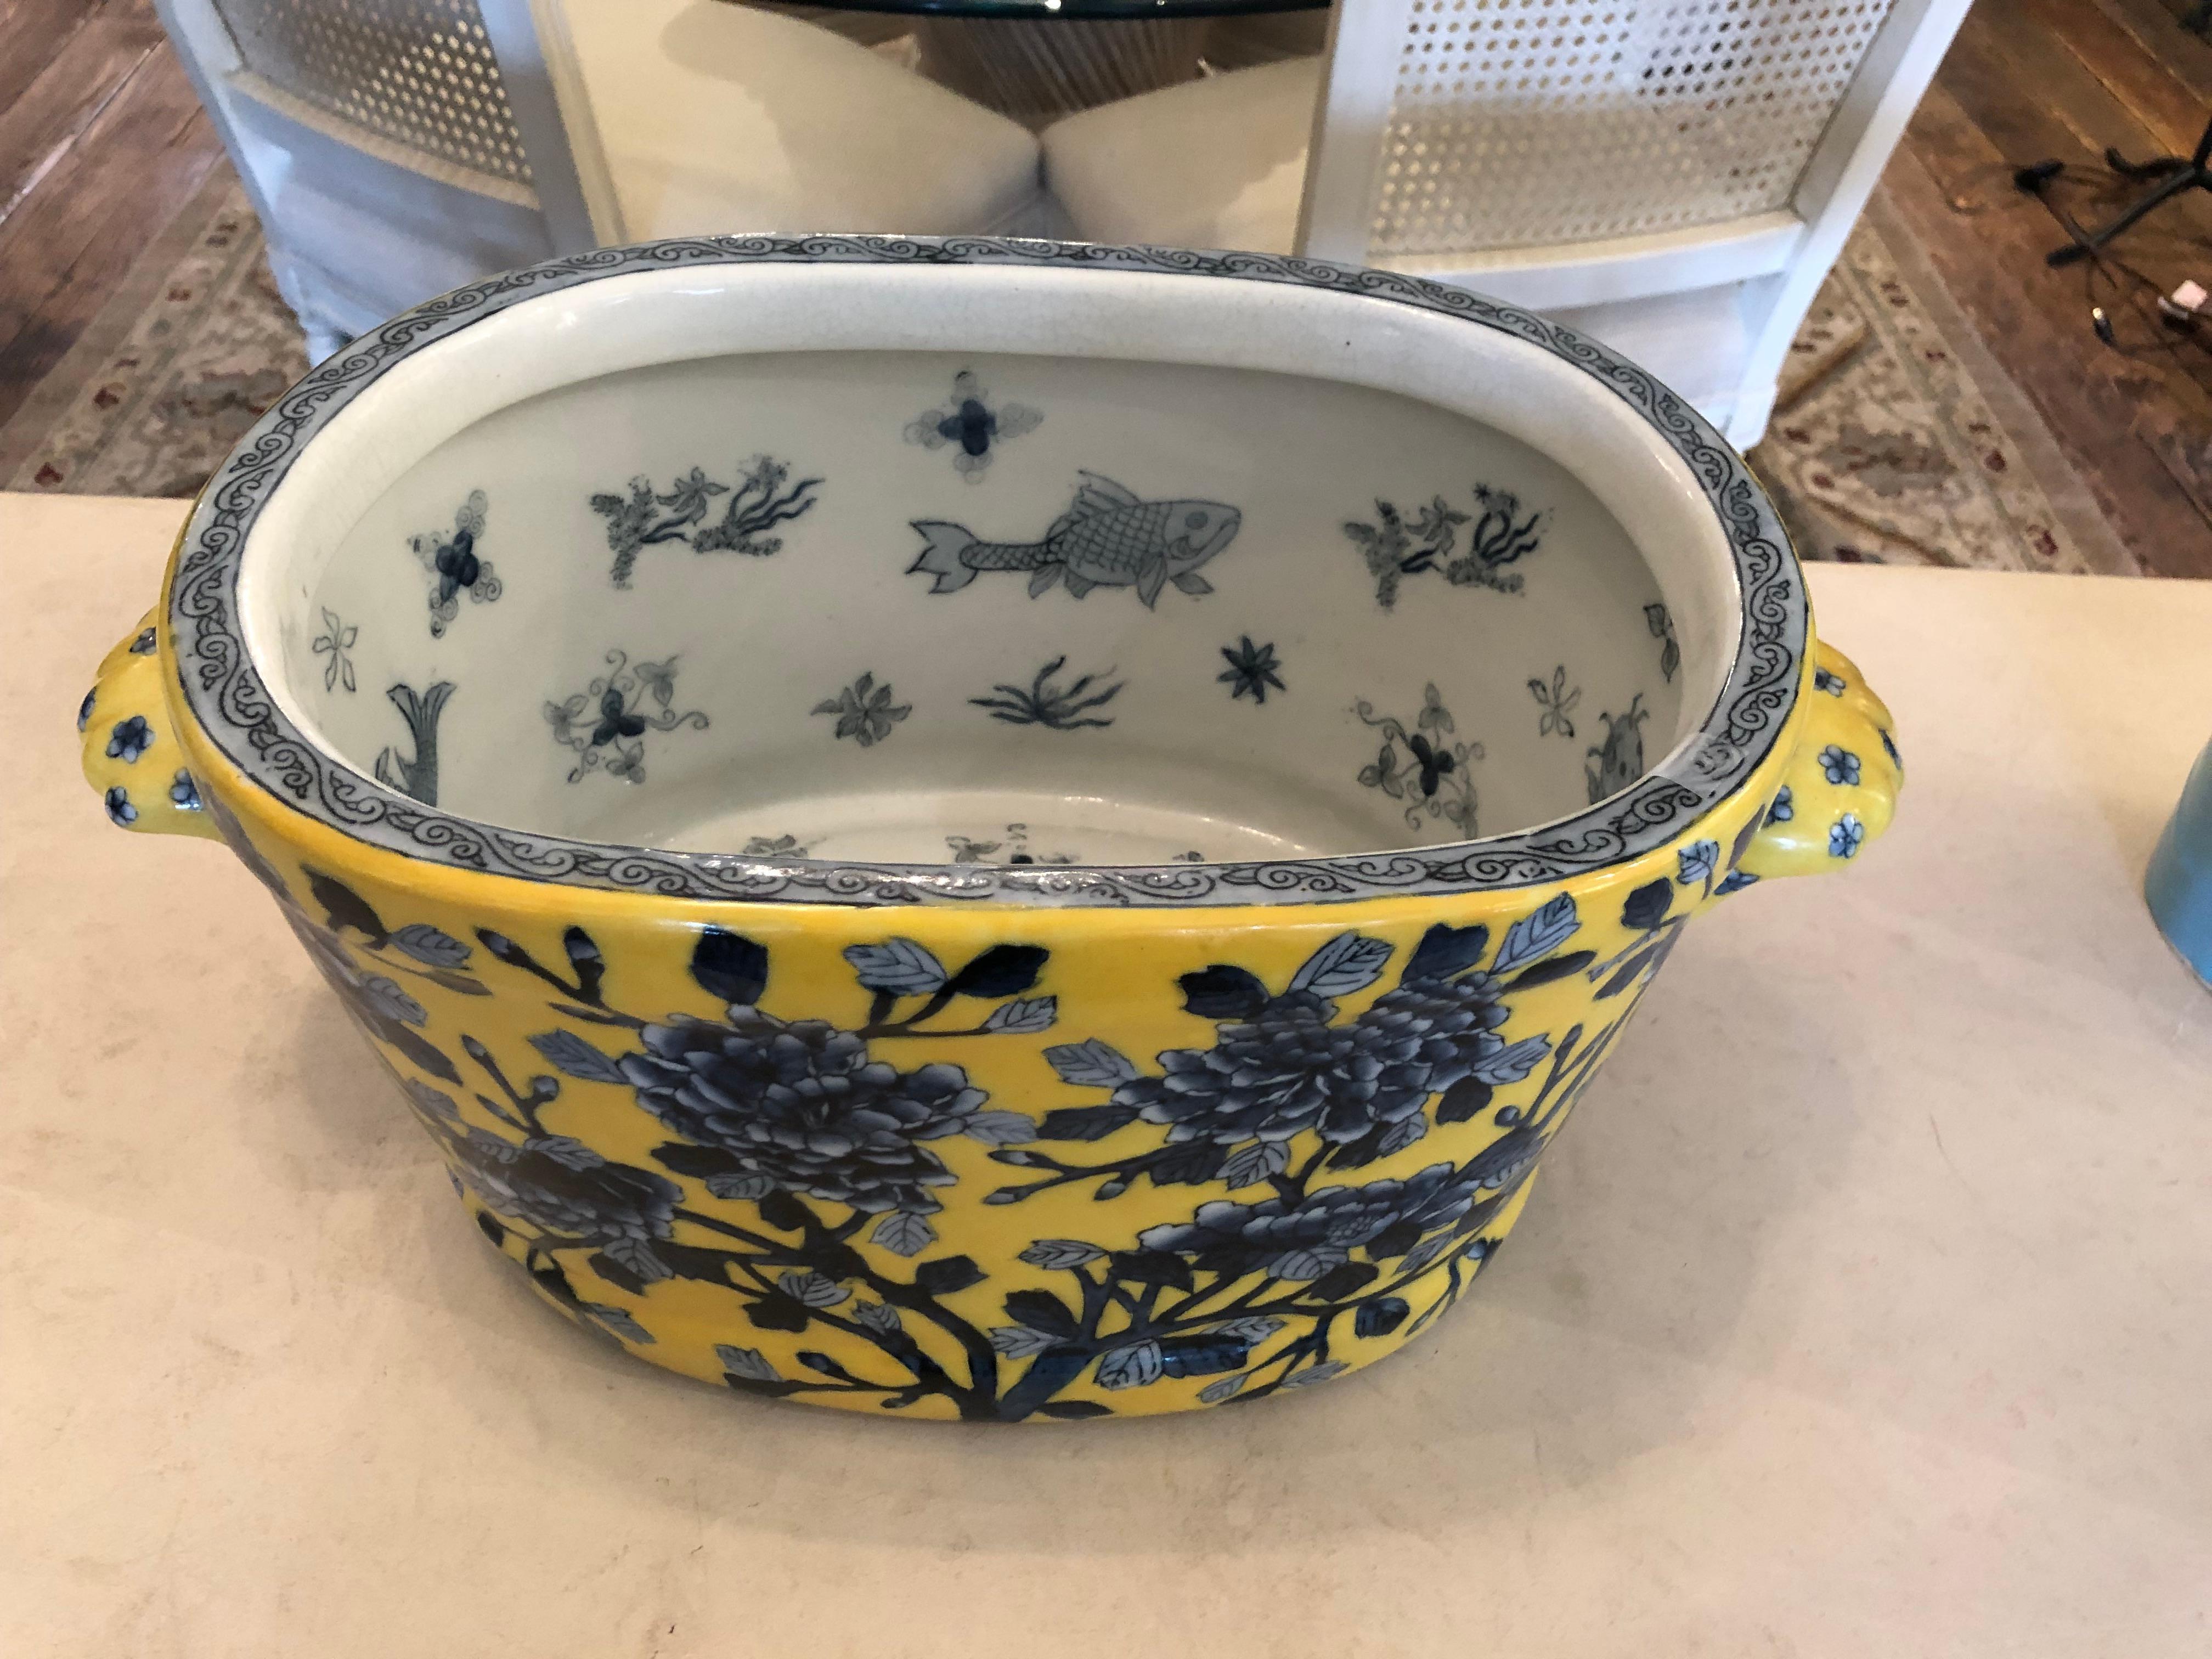 Lovely large oval planter footbath or centerpiece having beautiful Provencal color palette of yellow and blue with sculpted clam shell shaped handles. 
 Chinese mark on bottom,
Interior is blue and white with koy fish decoration.   Peonies adorn the